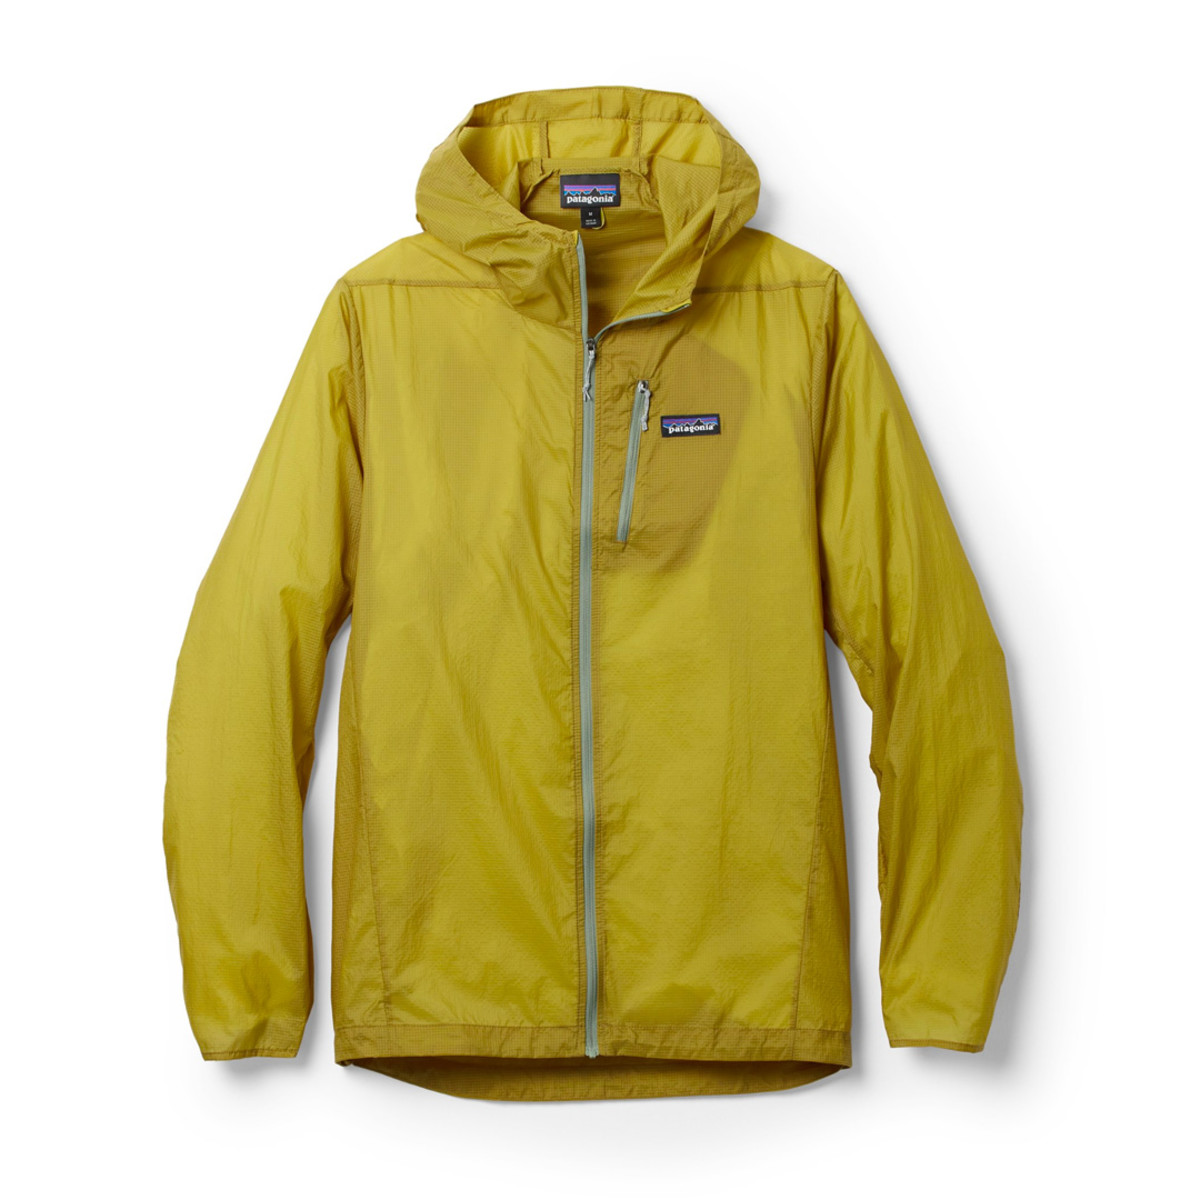 Patagonia’s Houdini Jacket Is On Sale for as Low as $65 - Men's Journal